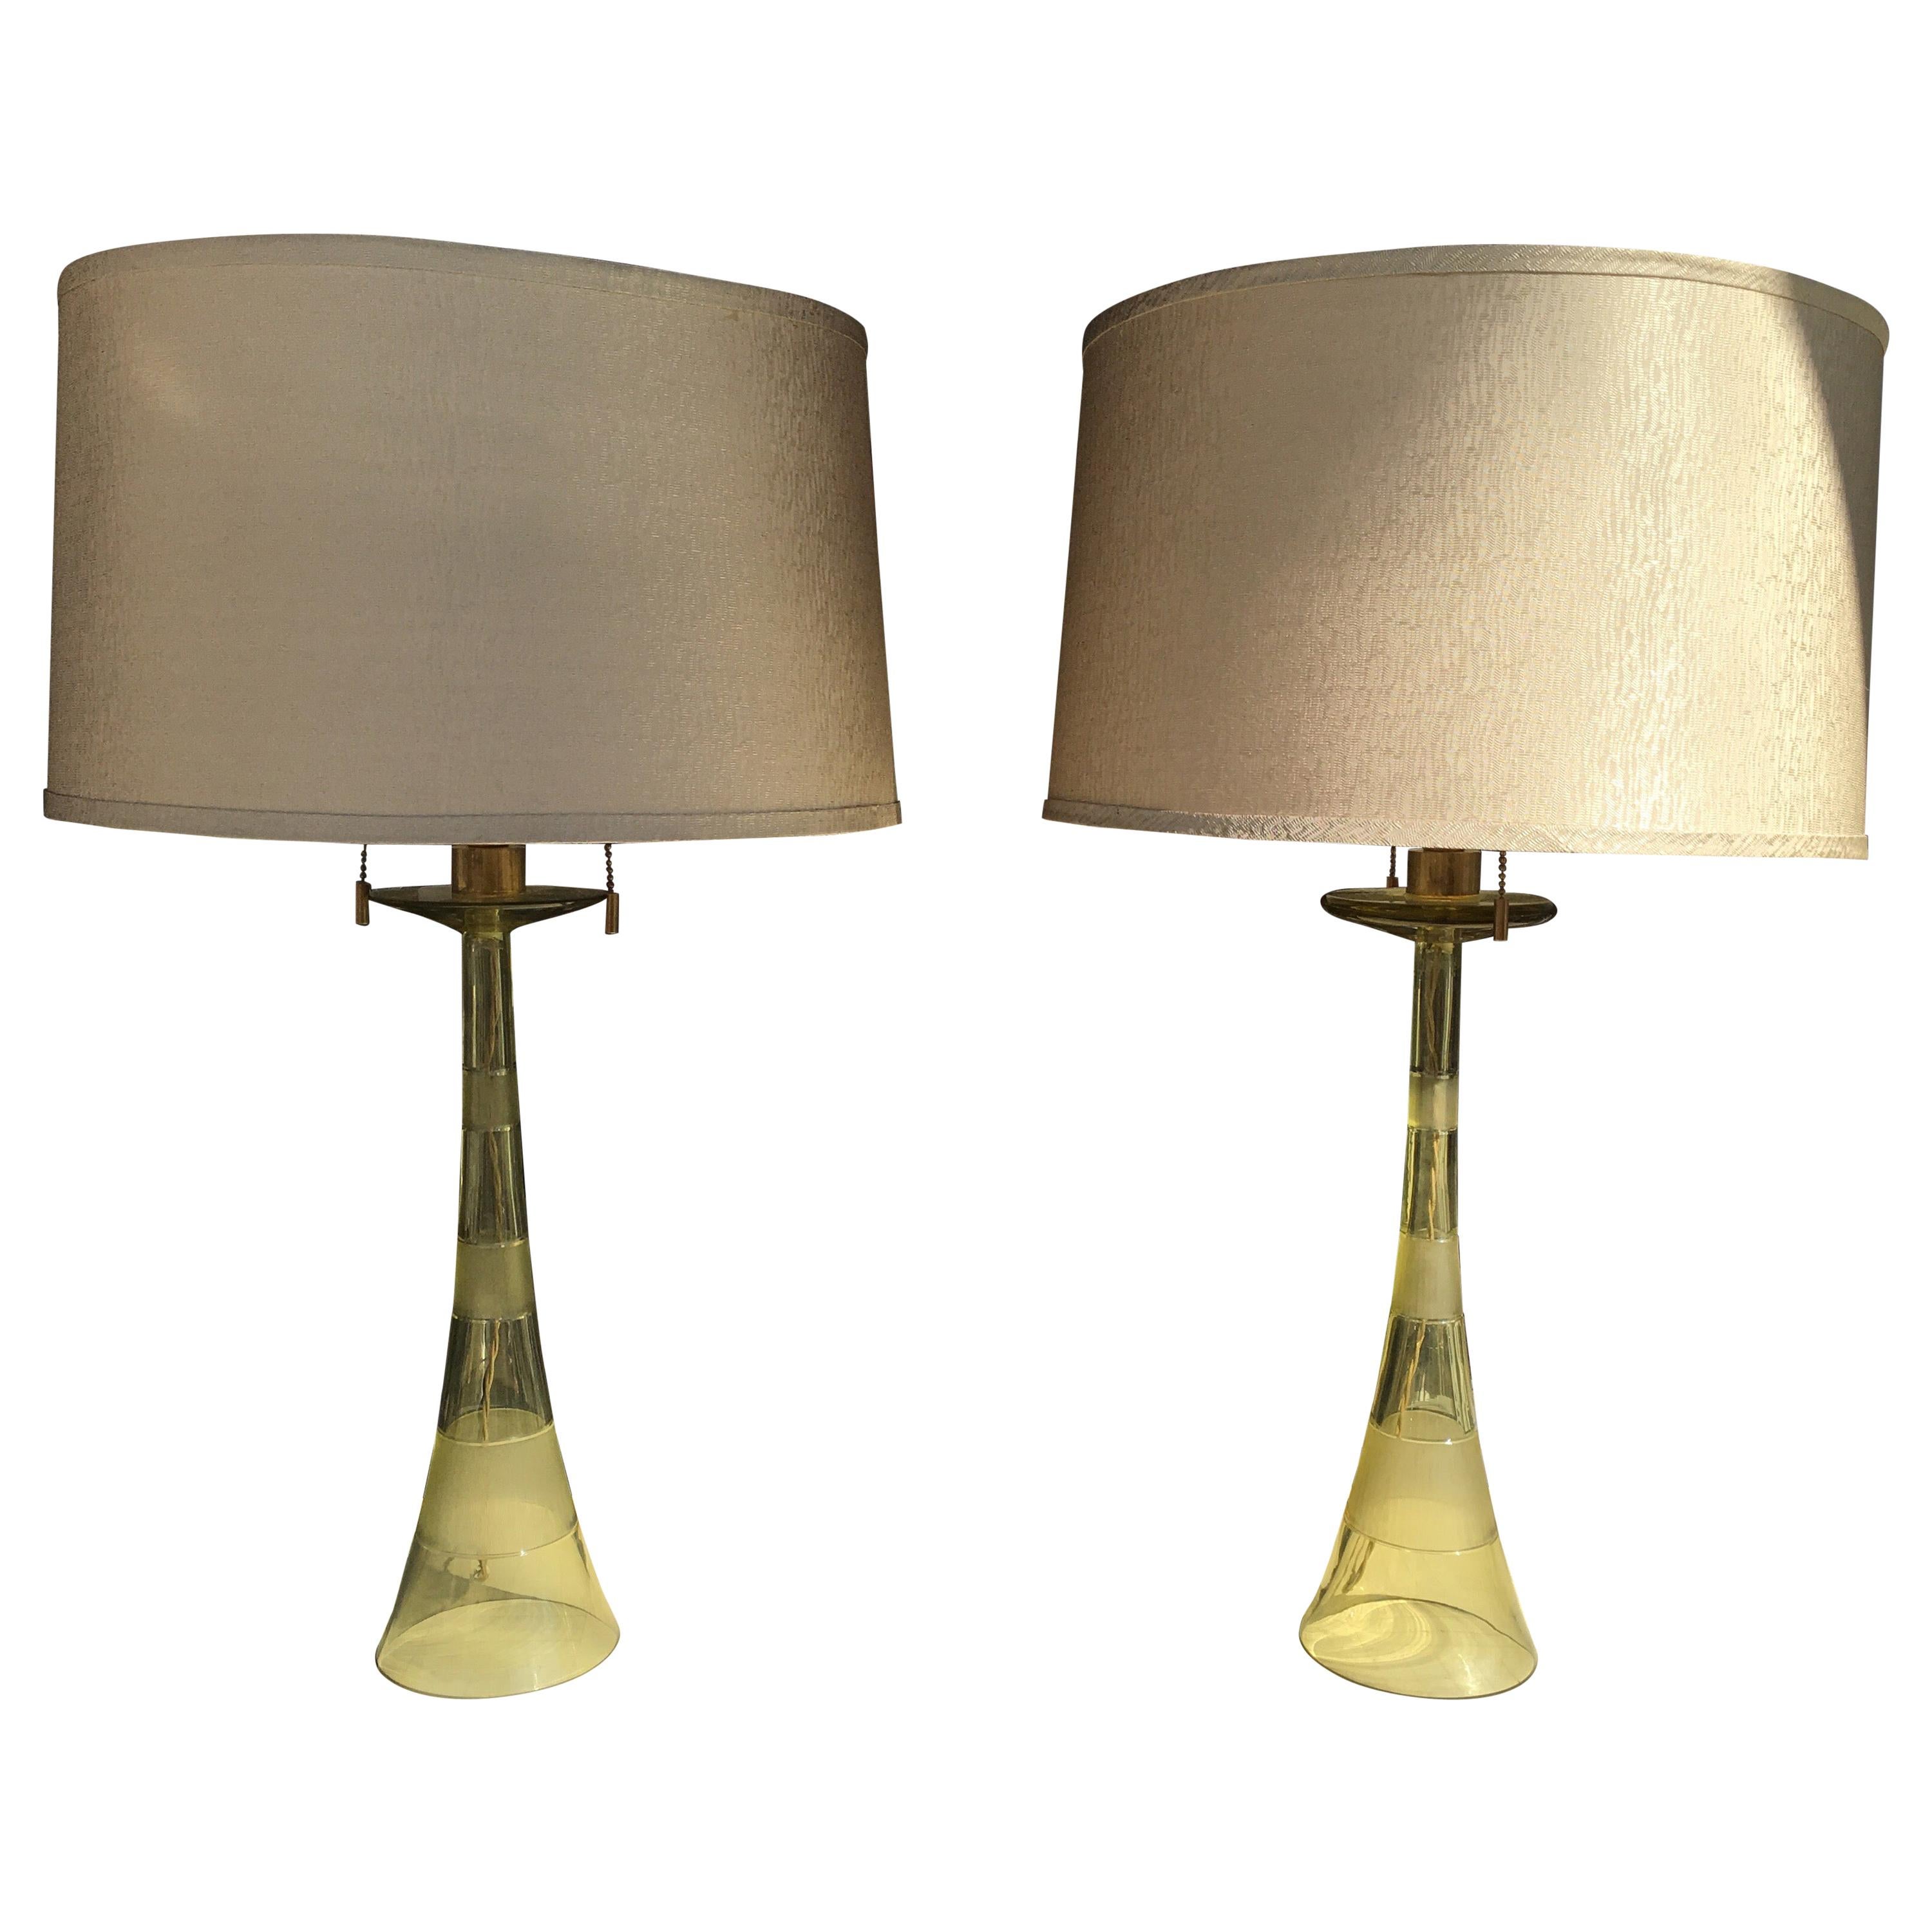 John Hutton for Donghia Pair of Citrine Italian Glass Lamps with Custom Shades